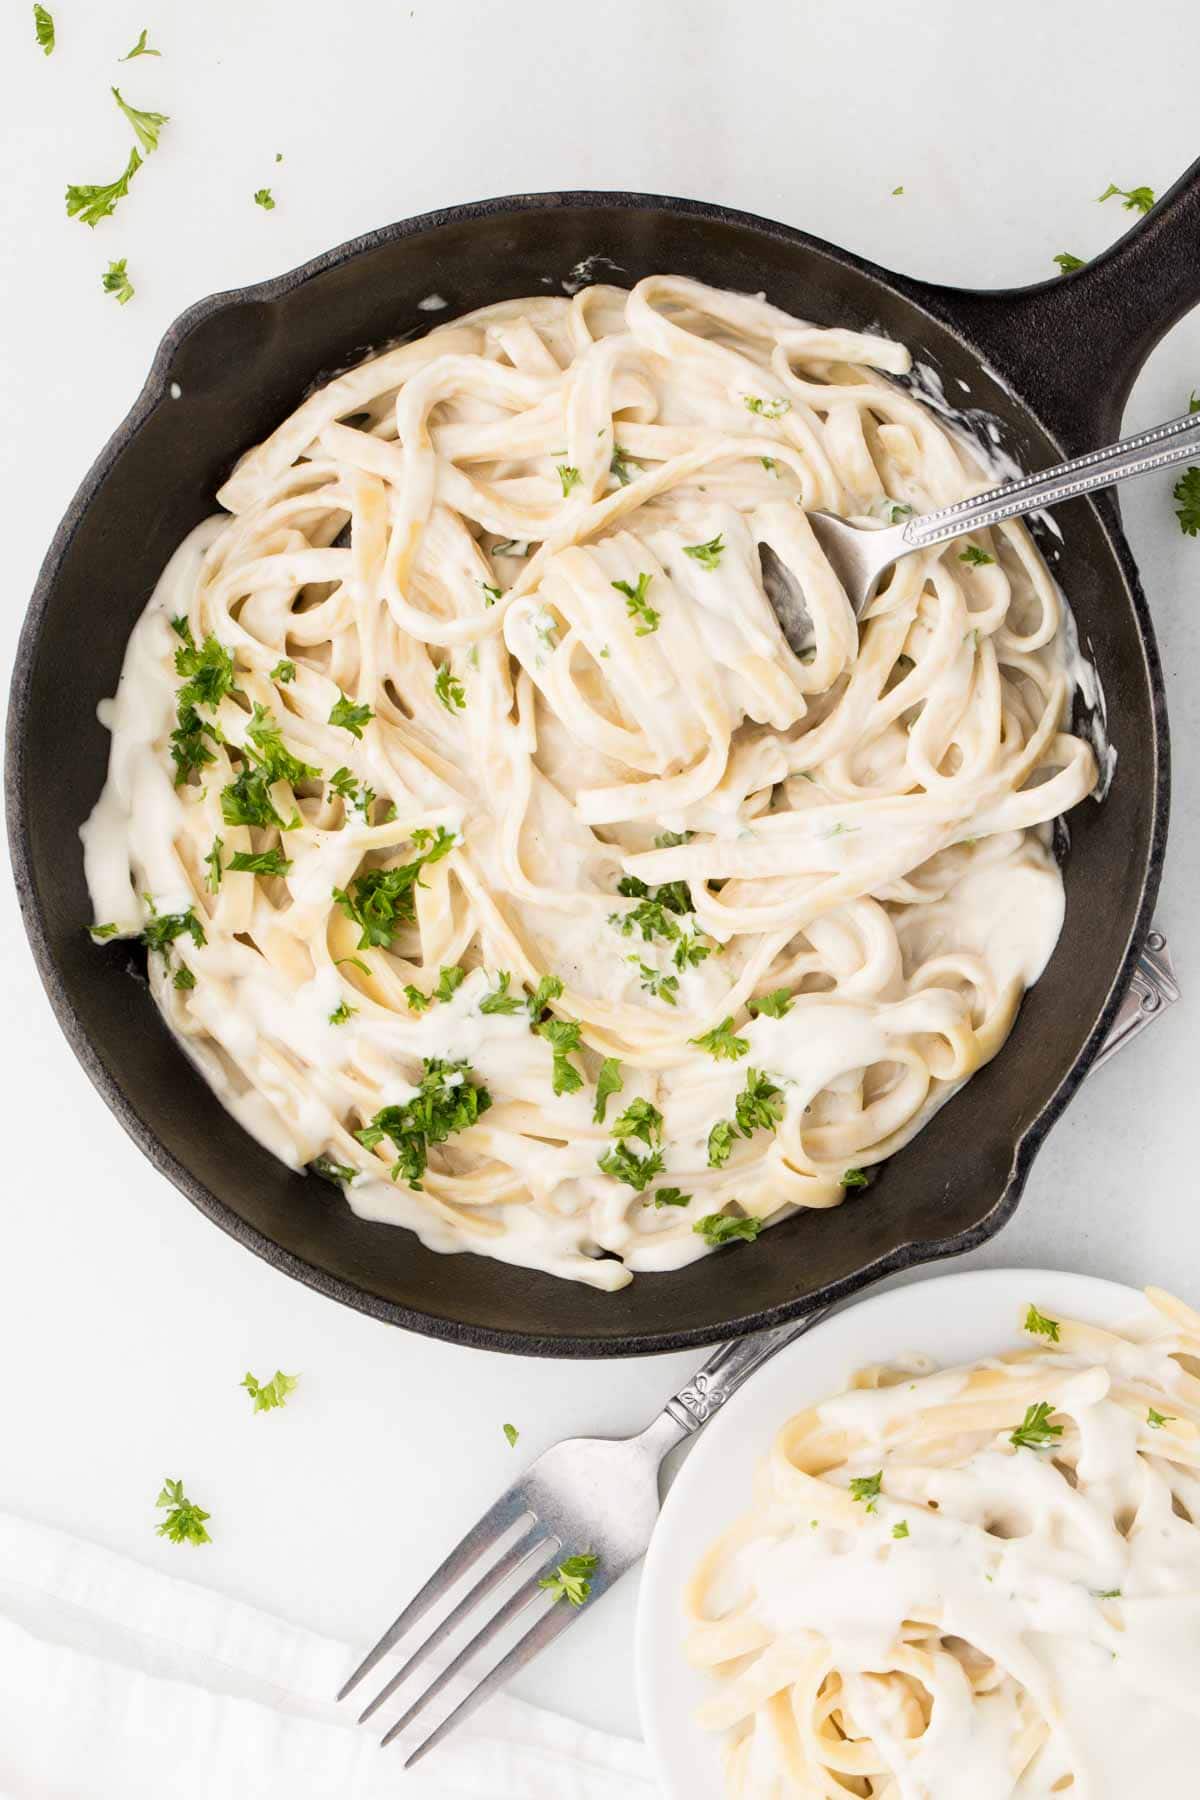 cast iron skillet full of vegan fettuccine alfredo, garnished with parsley, small white plate in right bottom corner of image